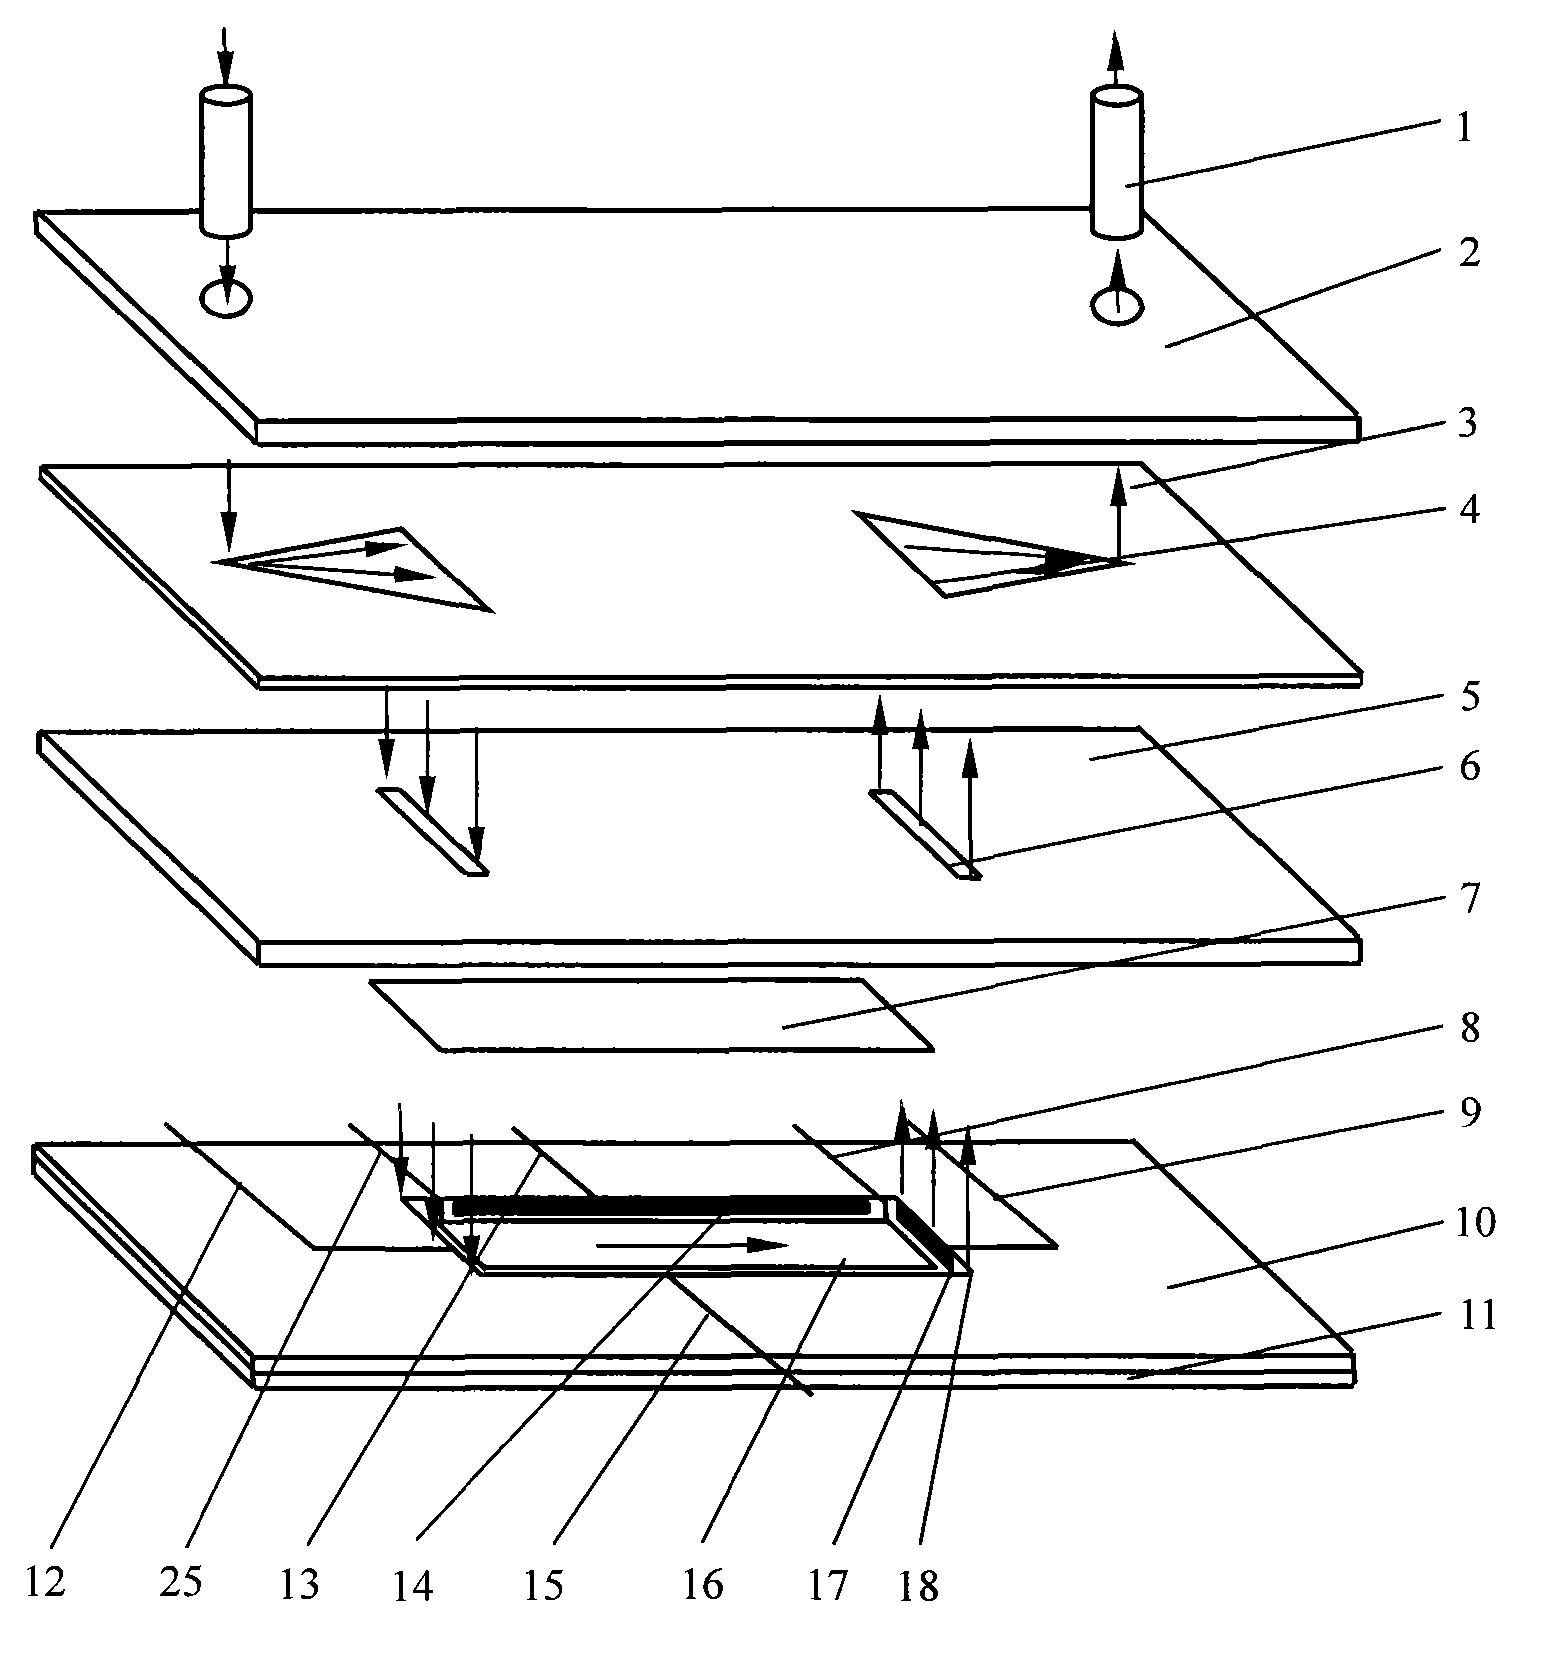 Microtopological-structure plate flow chamber capable of applying electric and shearing force stimulation